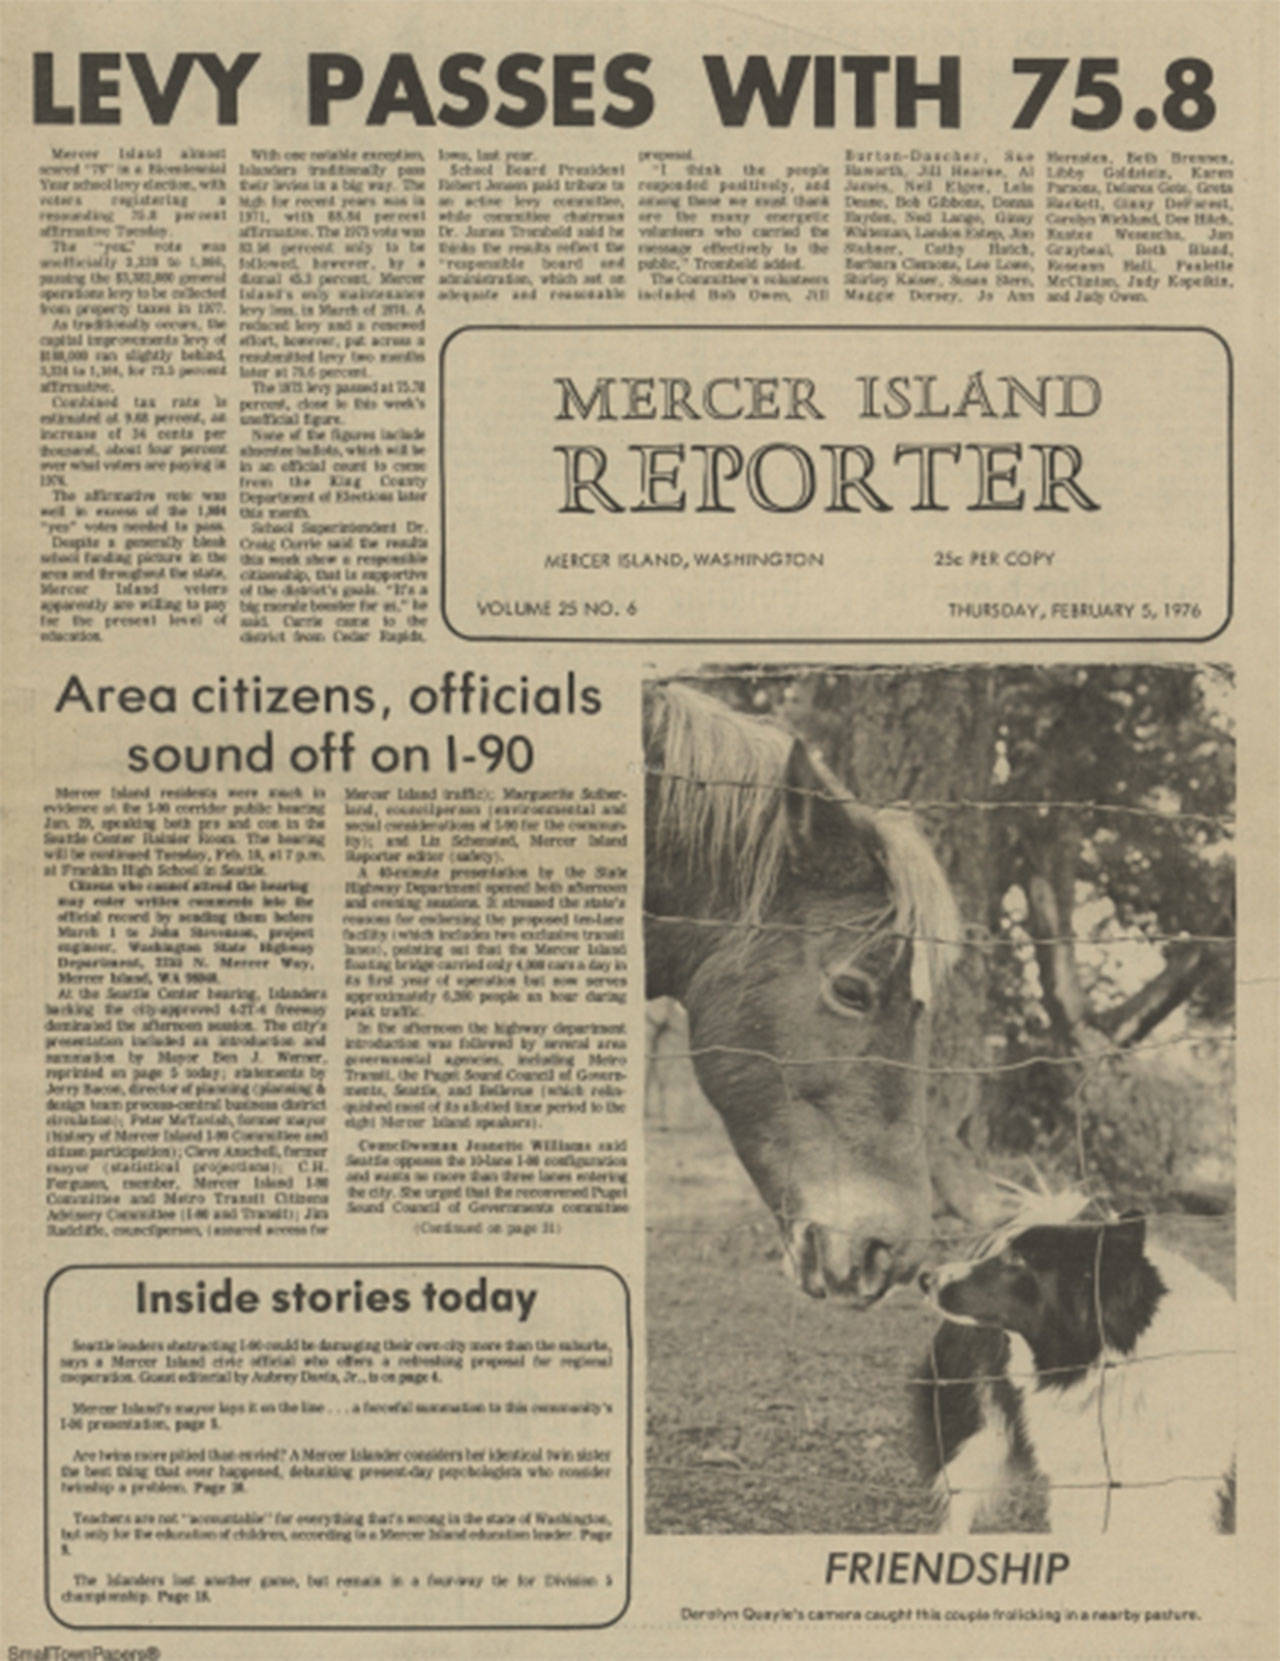 The front page of the Feb. 5, 1976 issue of the &lt;em&gt;Mercer Island Reporter&lt;/em&gt;, and other selected pages, can now be found online thanks to an archiving project of the Mercer Island Historical Society. Image via mih.stparchive.com